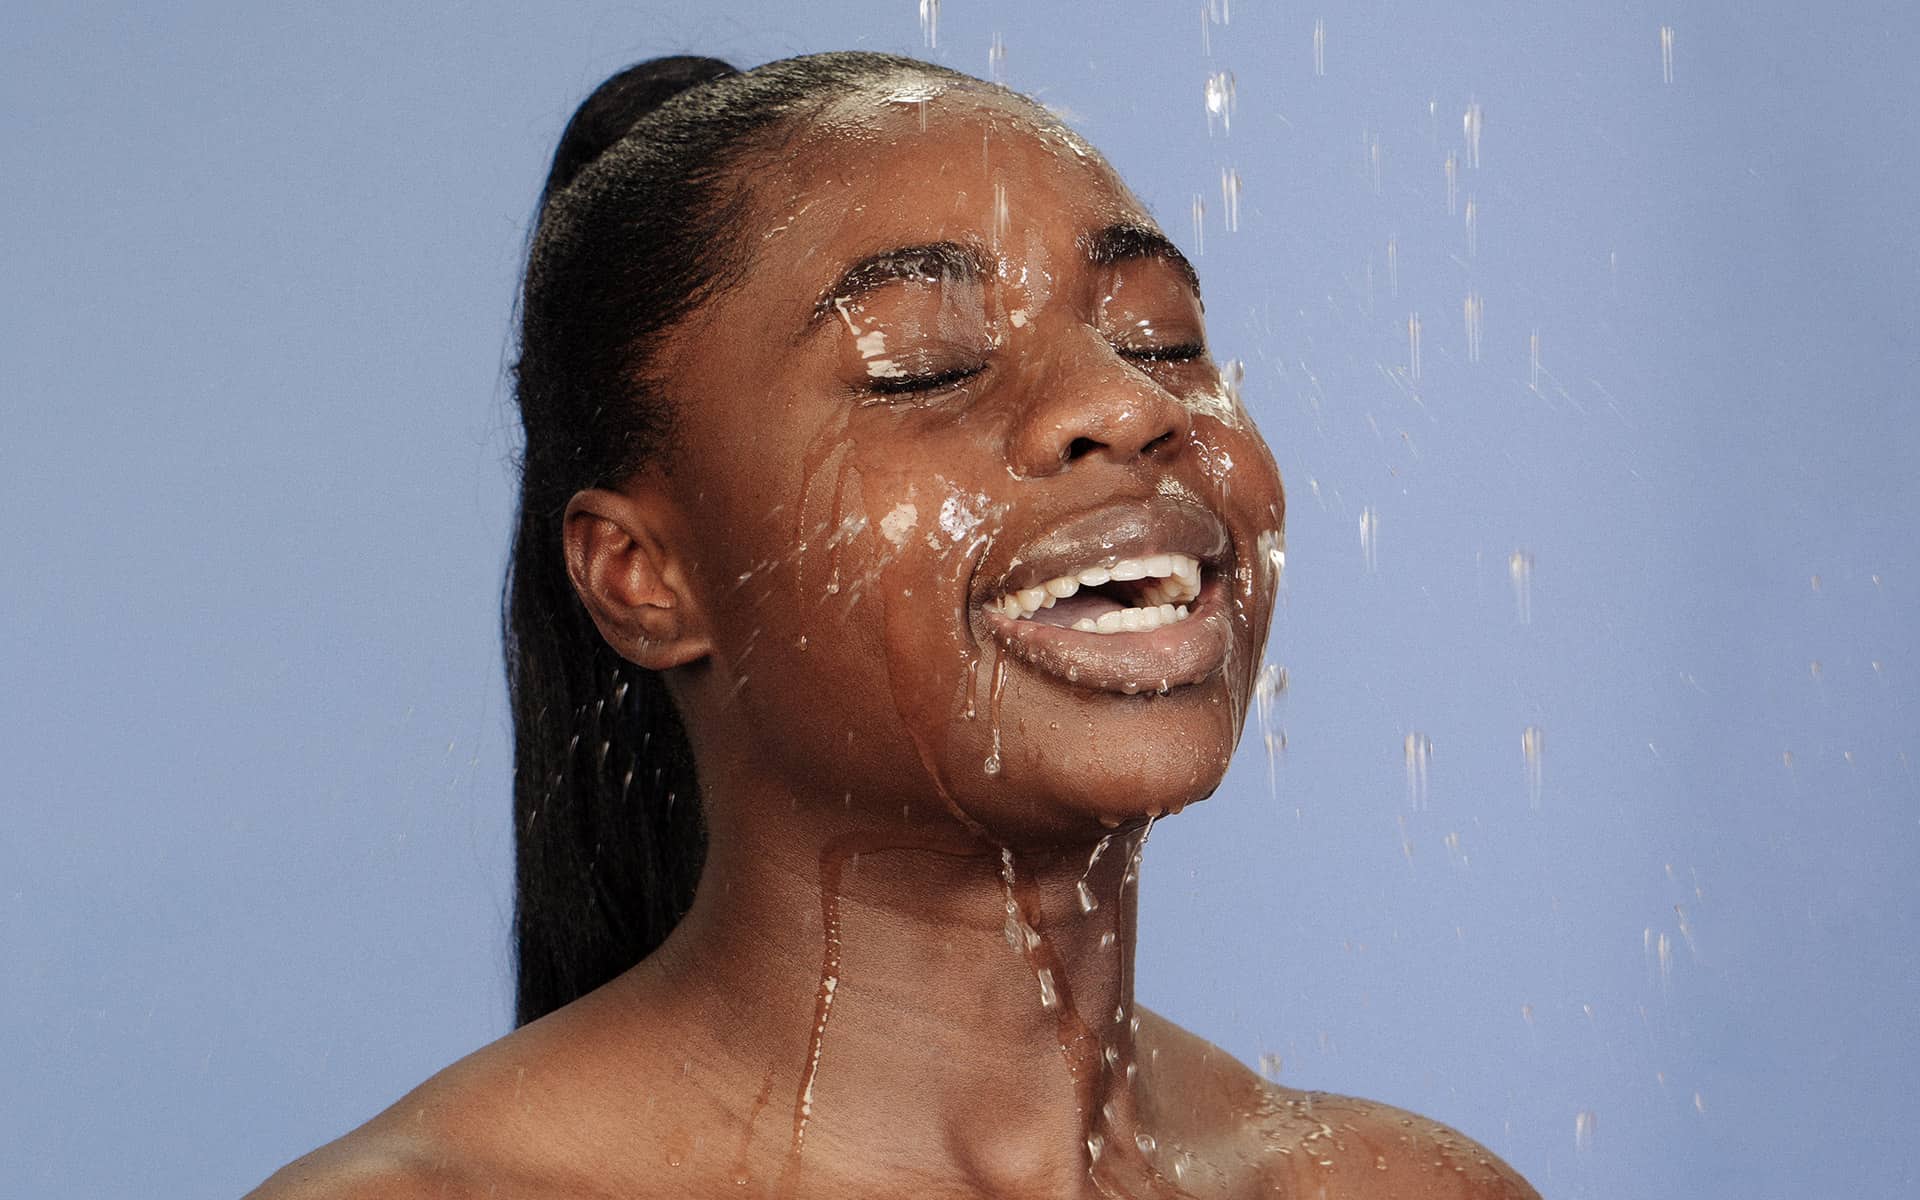 Woman with water on her face as if she is in the shower 